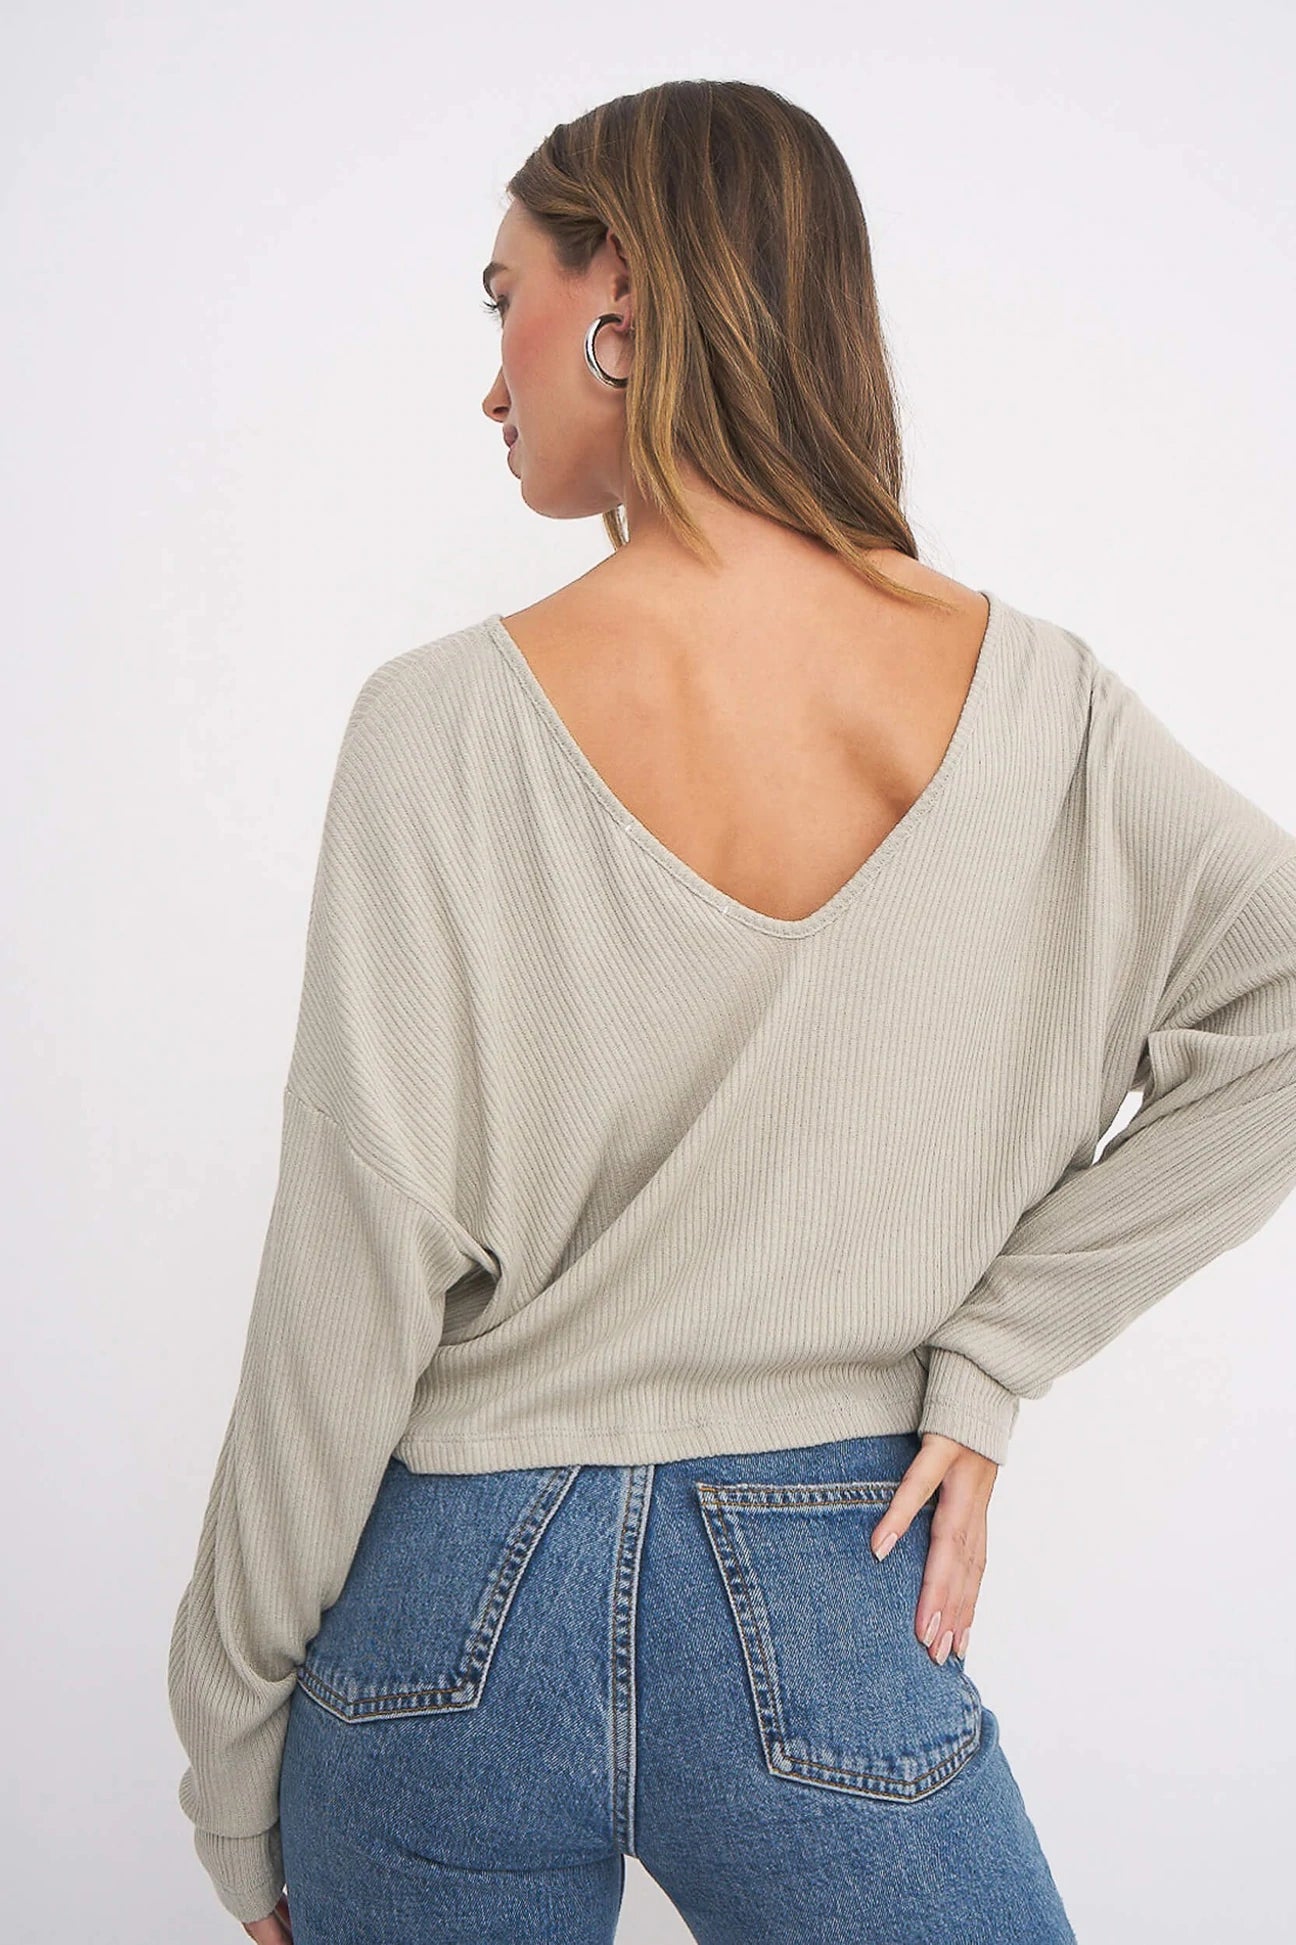 The AS IF Ruched Longsleeve